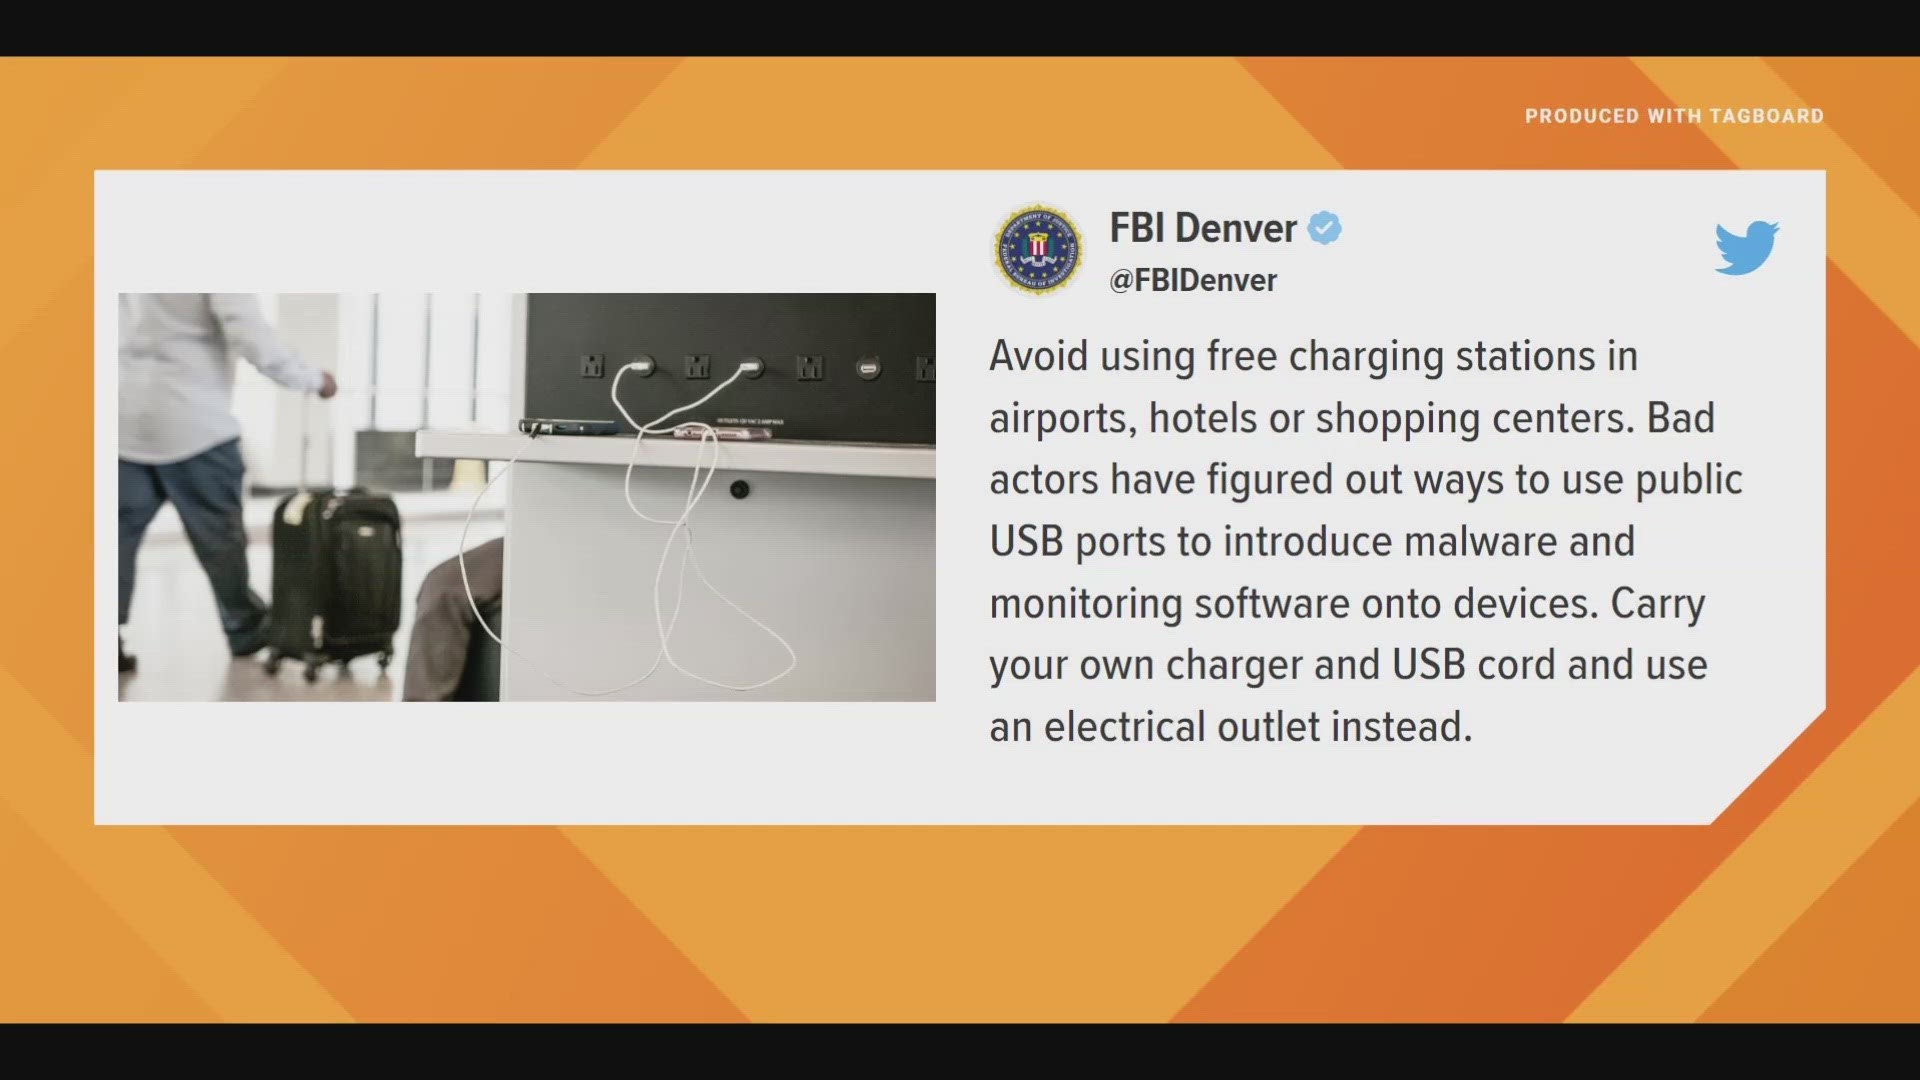 FBI Denver is warning people against using free USB charging stations at airports, hotels or shopping centers because hackers can use them to put malware on devices.